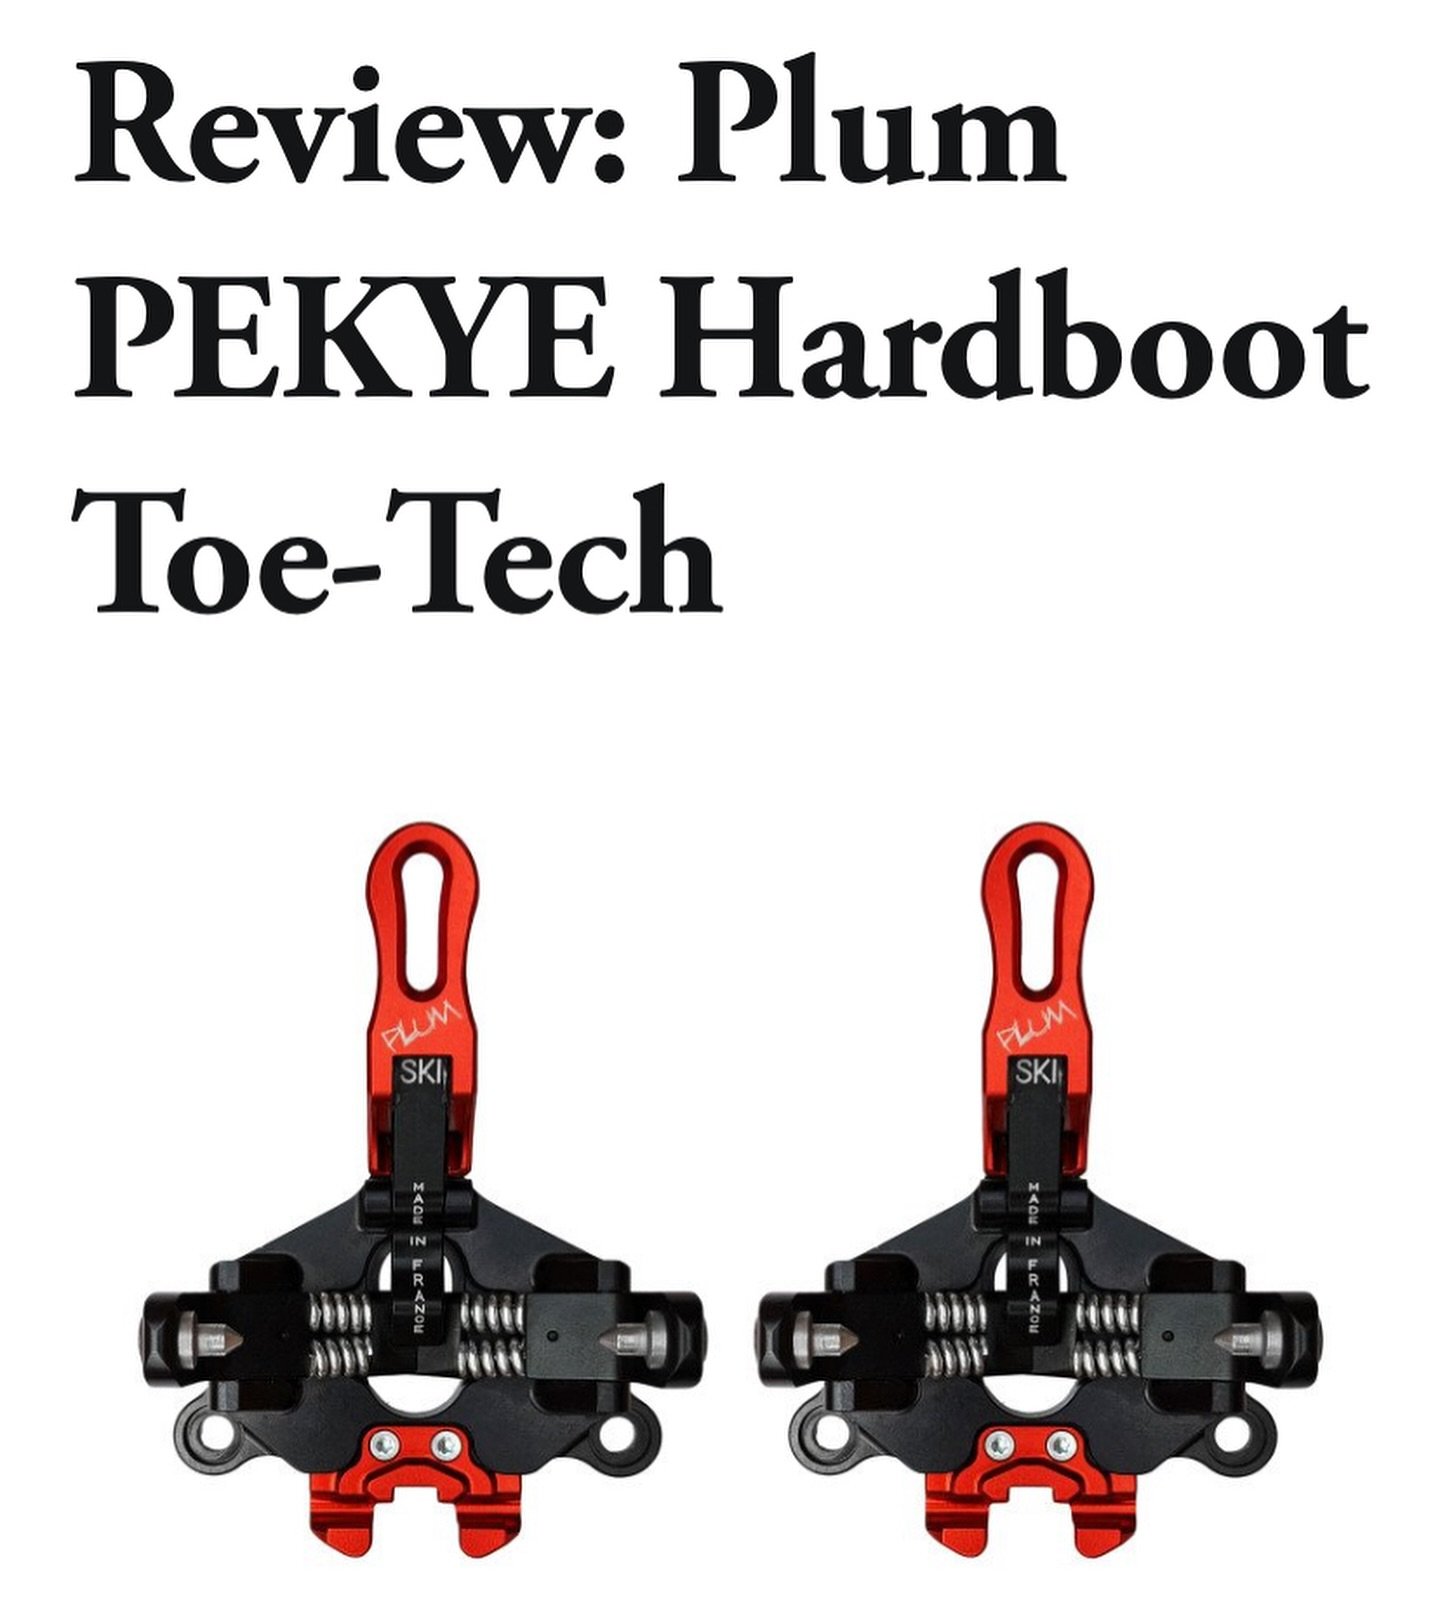 New Review of the @plumsplitboard PEKEY toe techs is up on our site, for all you hard boot lovers out there!
5⭐️&rsquo;s from our Pete. #hardbootsplitboarding #splitboarding 
Simply visit our Kit Junkies Pages for everything split.